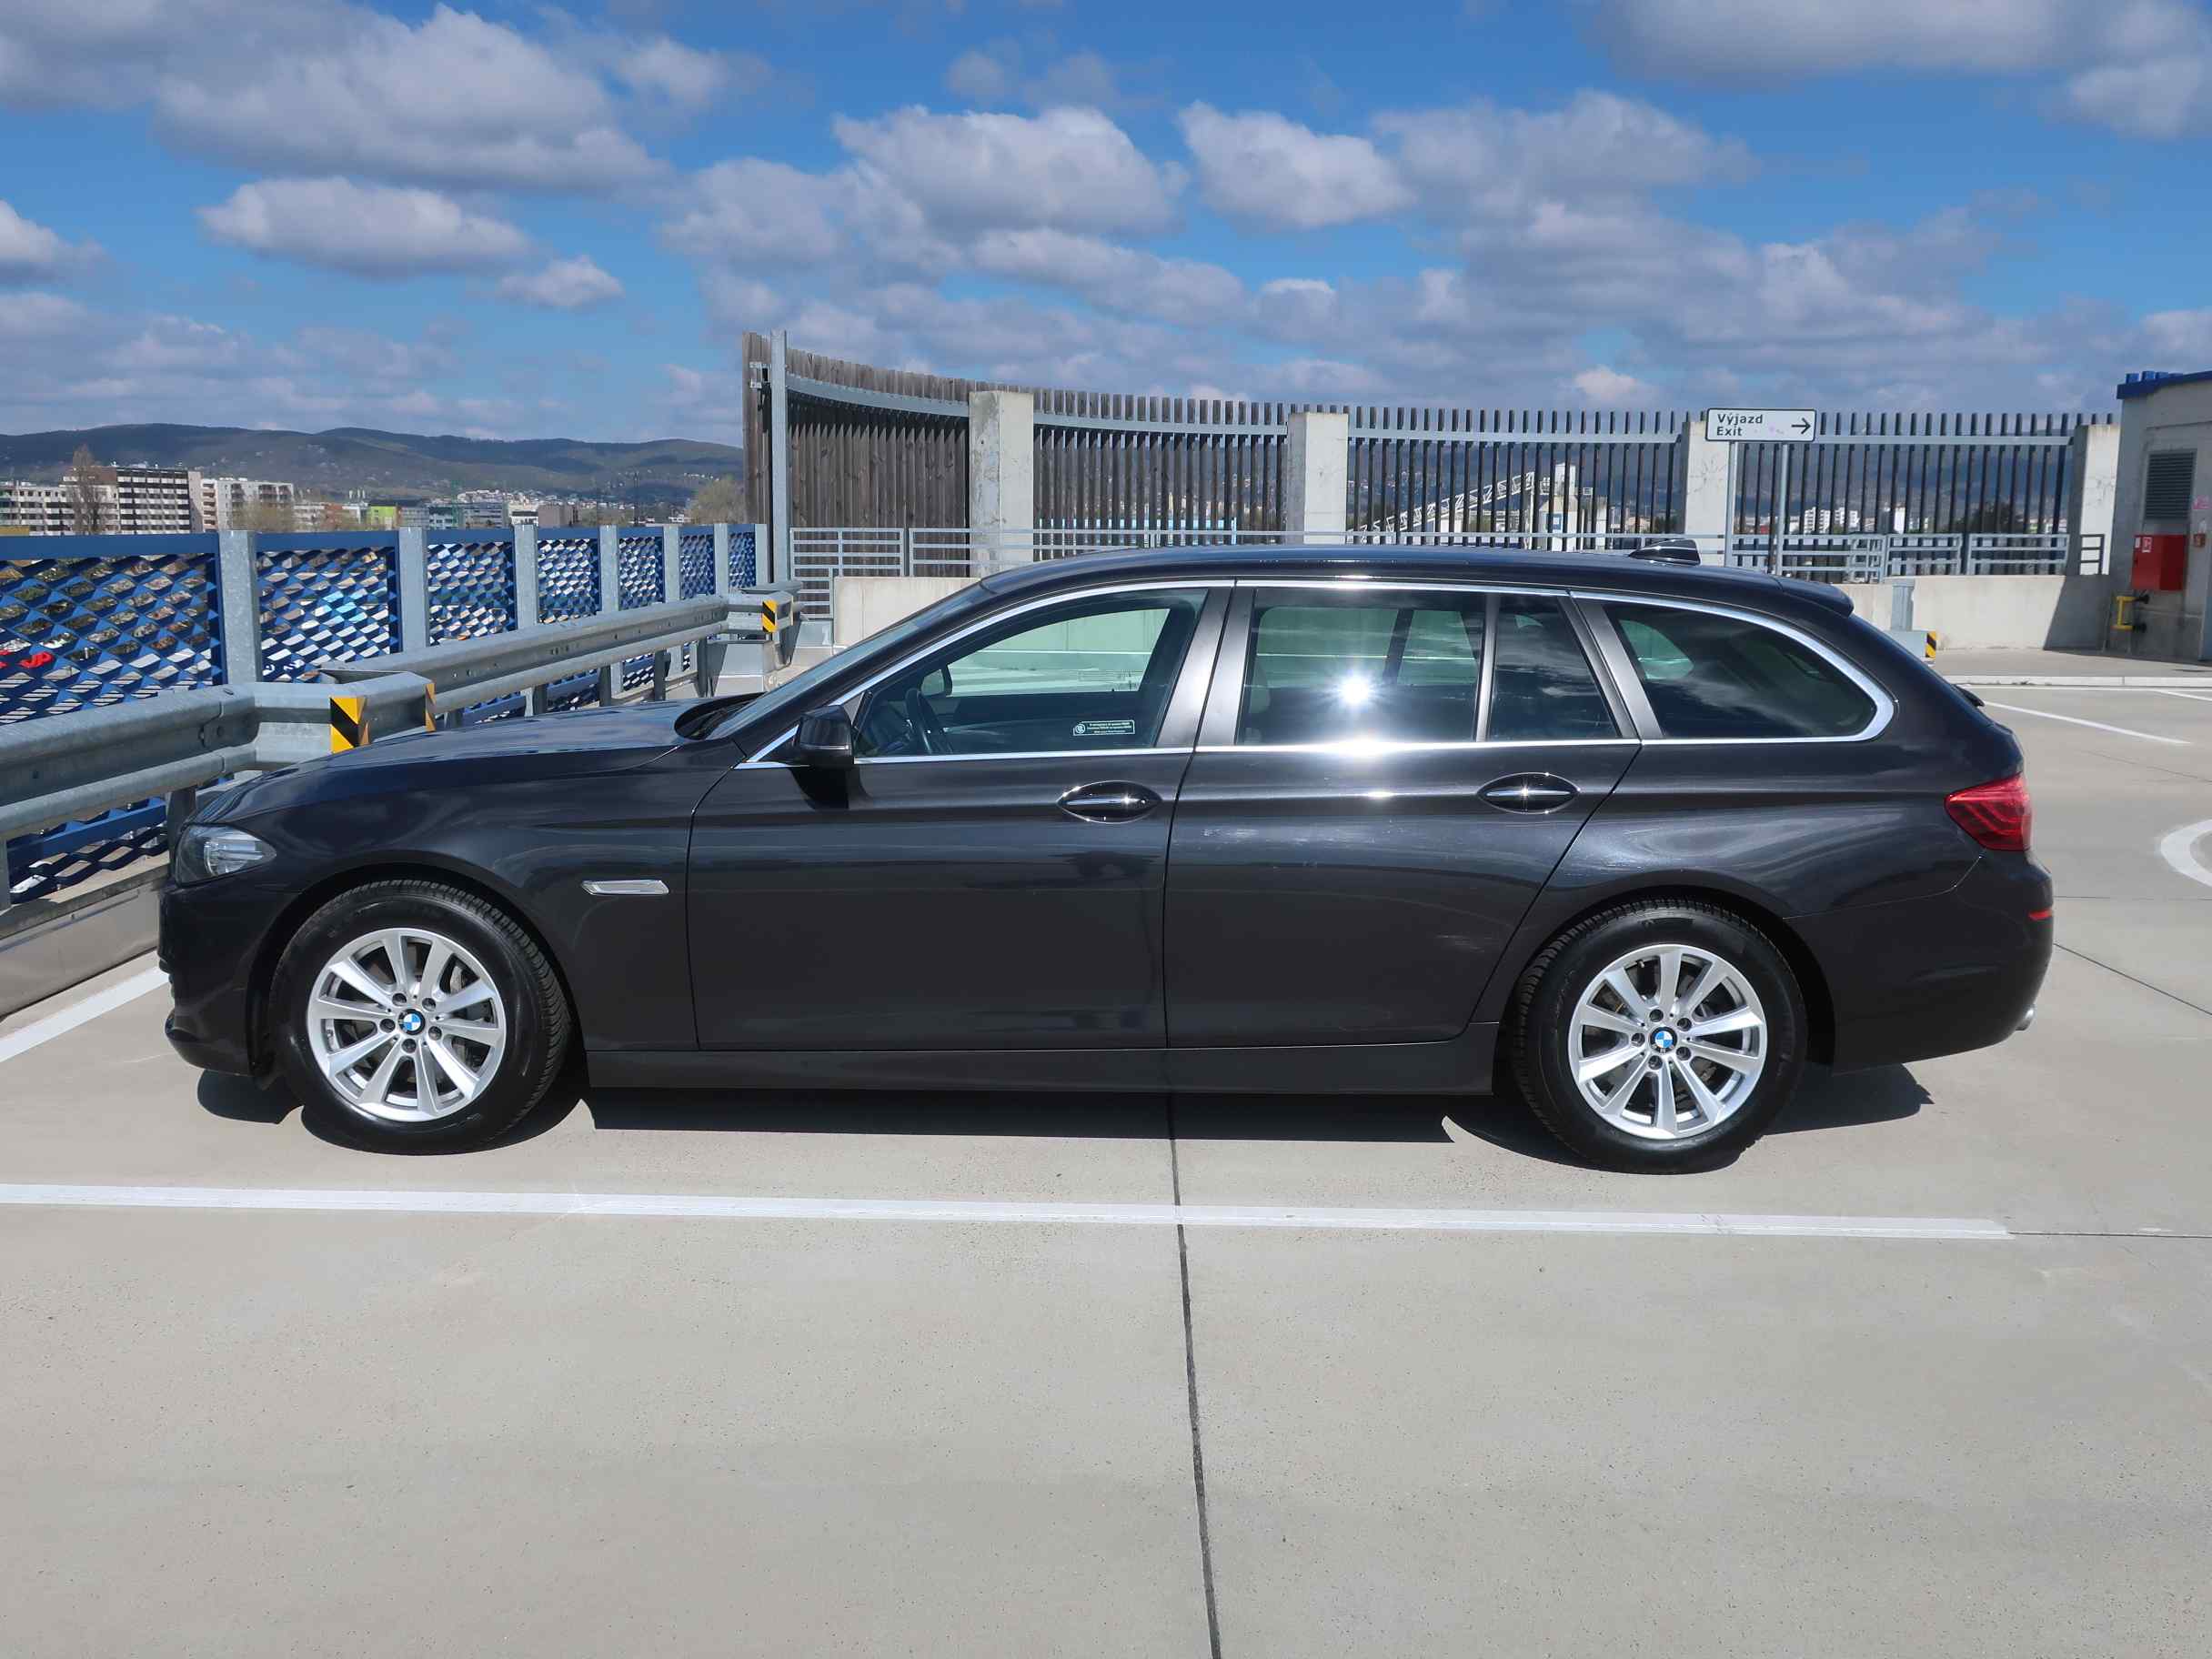 BMW 525d xDrive Touring Business